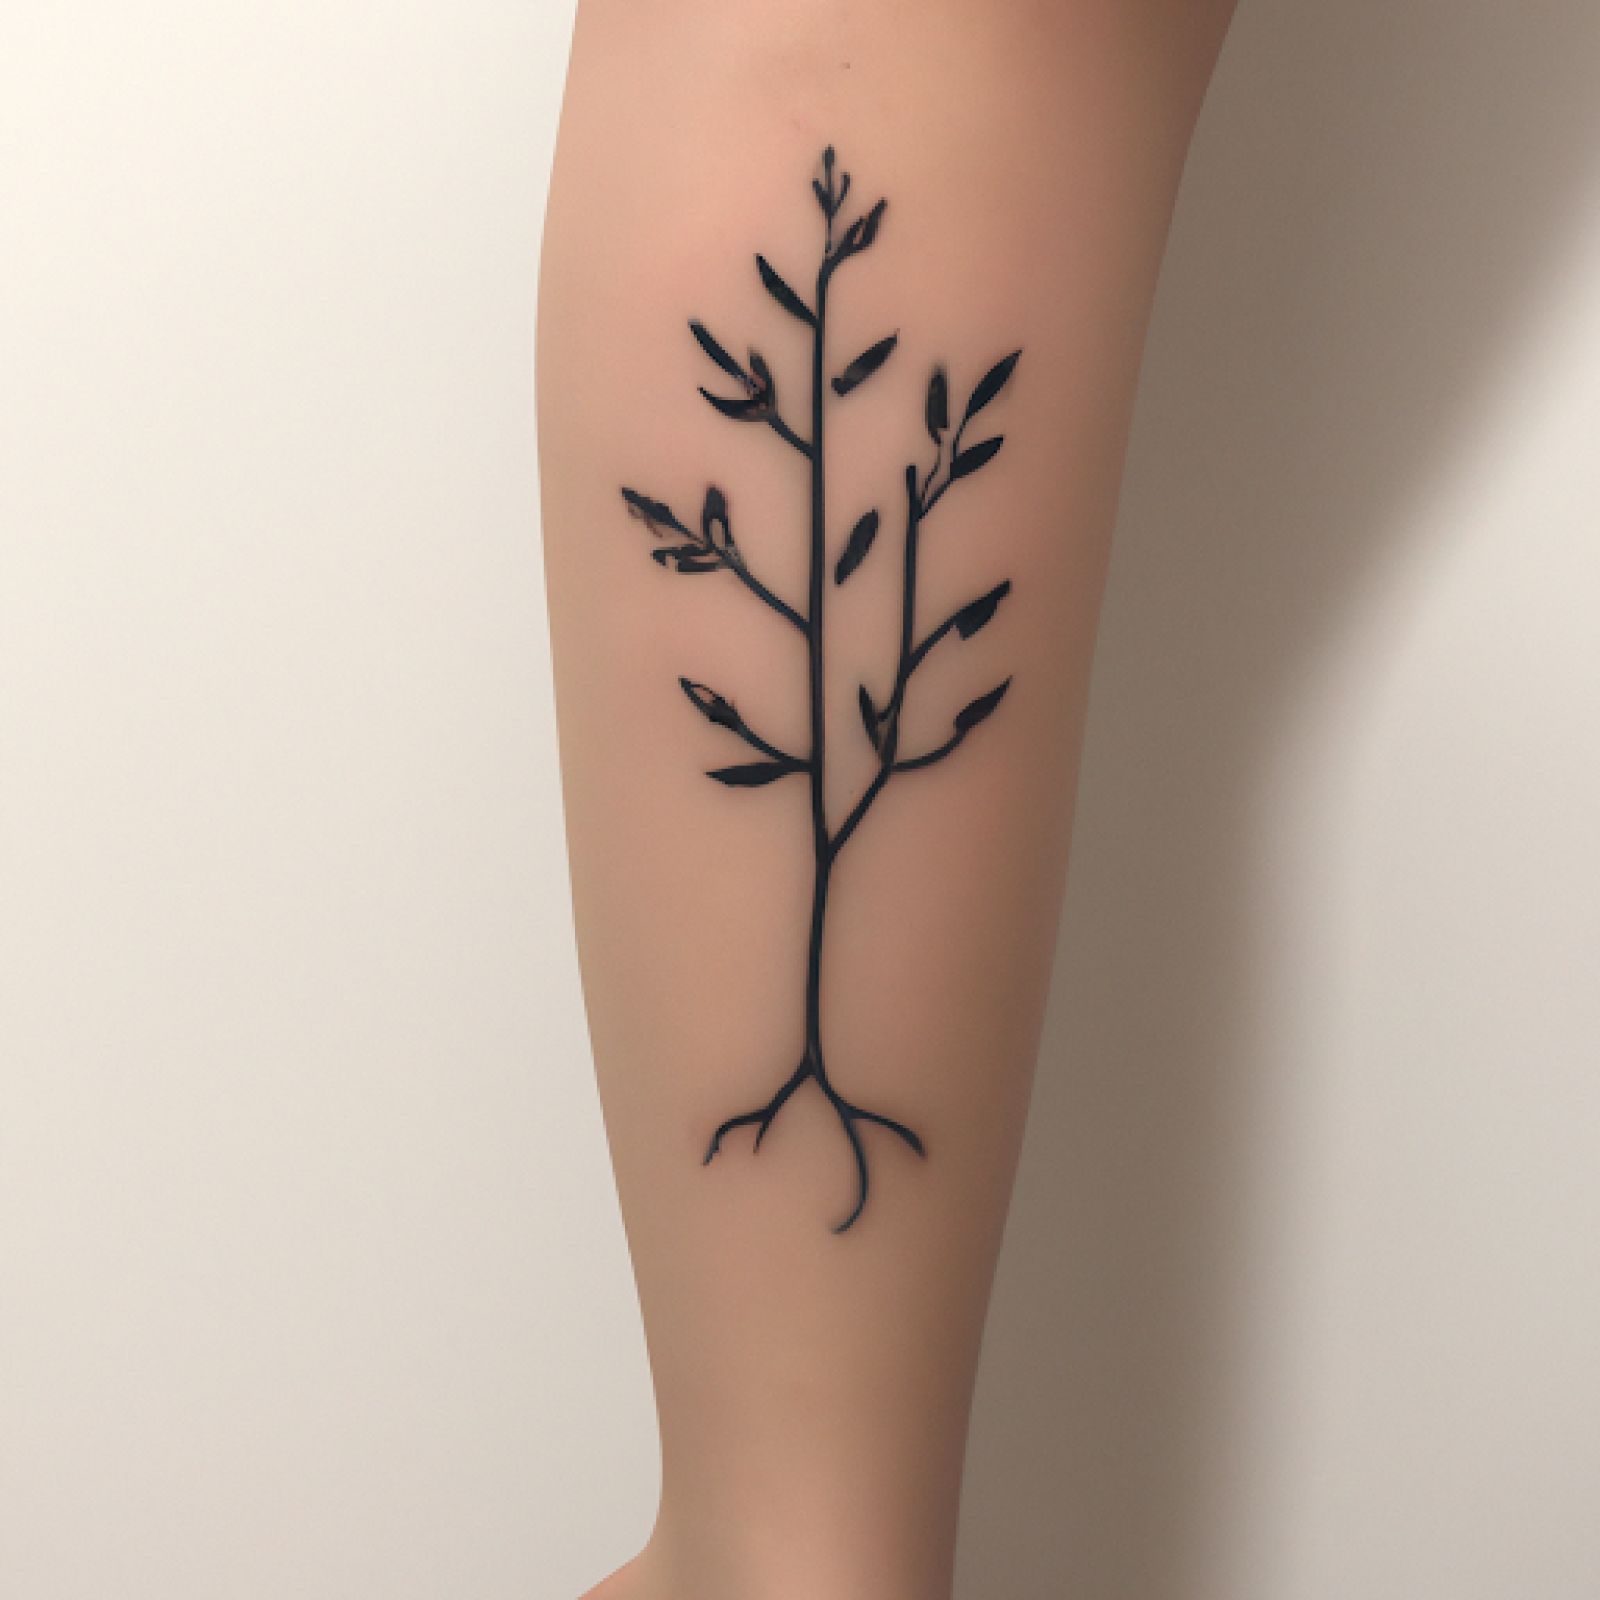 Tree of life tattoo on calf for women